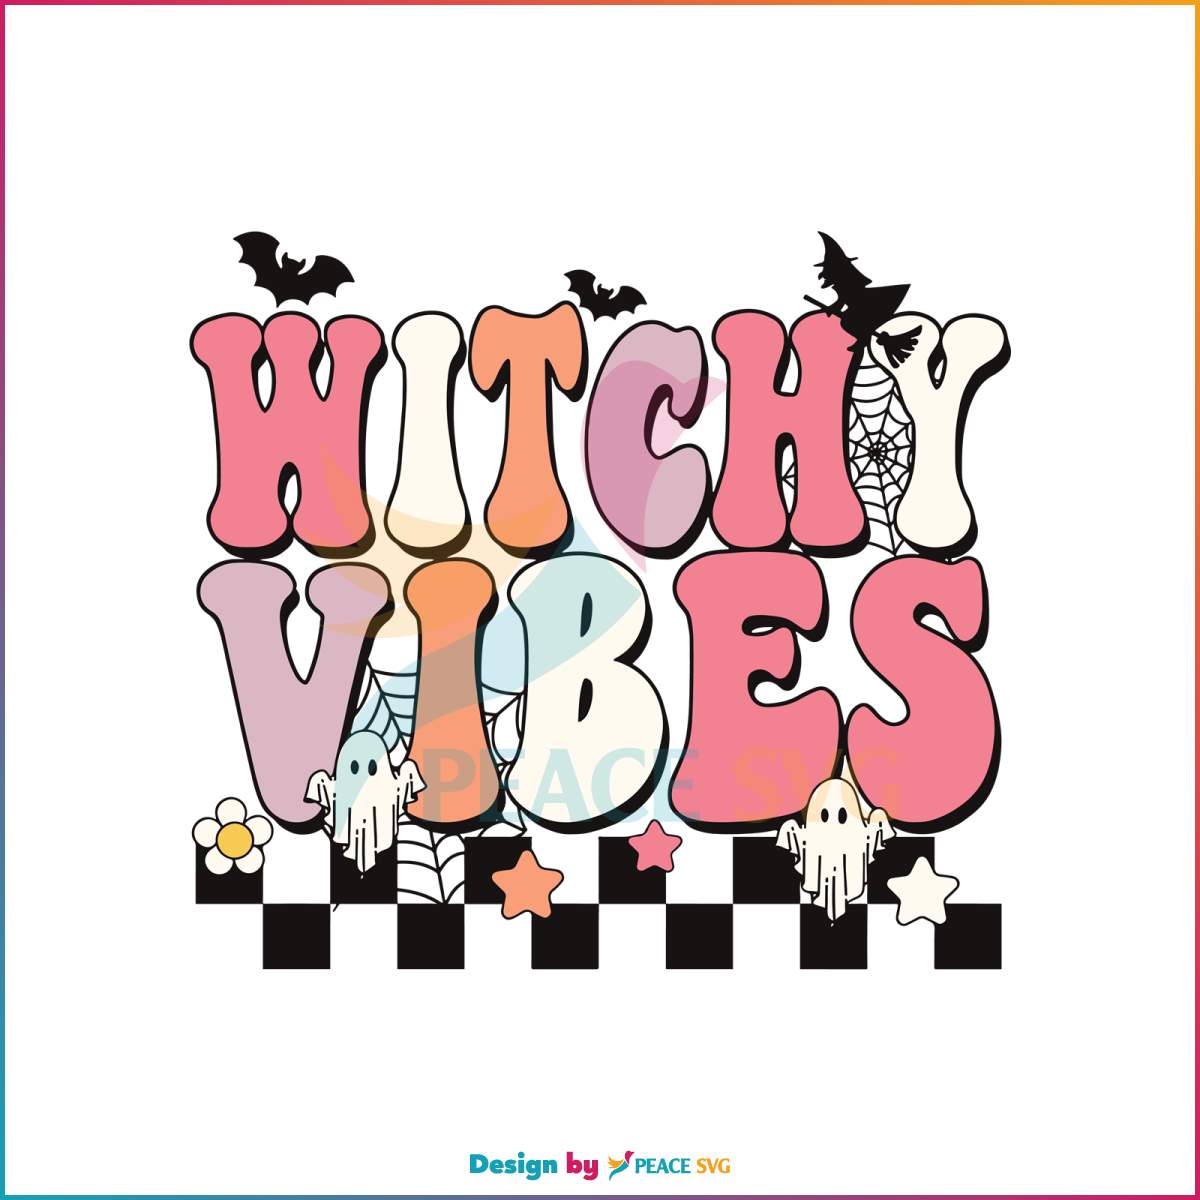 retro-groovy-halloween-witchy-vibes-svg-graphic-design-file